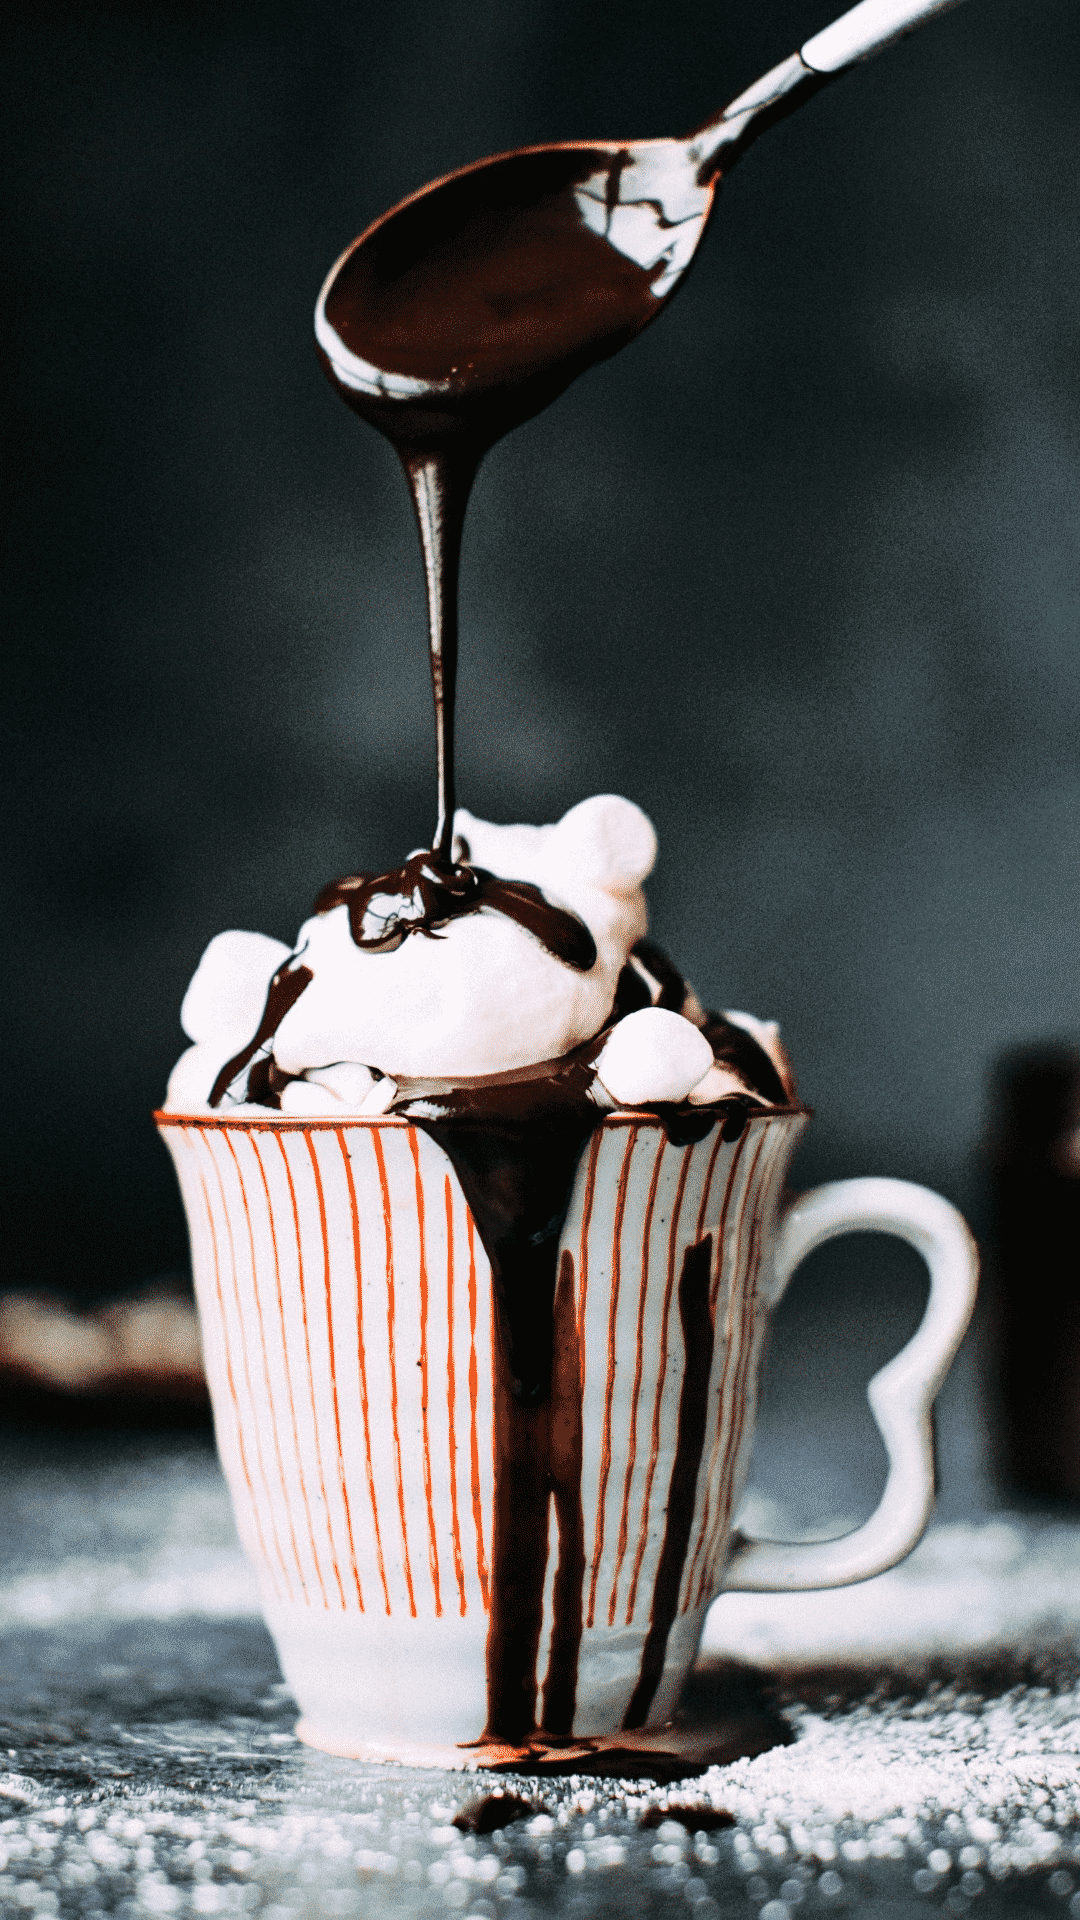 A cup of hot chocolate with marshmallows and chocolate sauce being poured over the top. - Marshmallows, chocolate